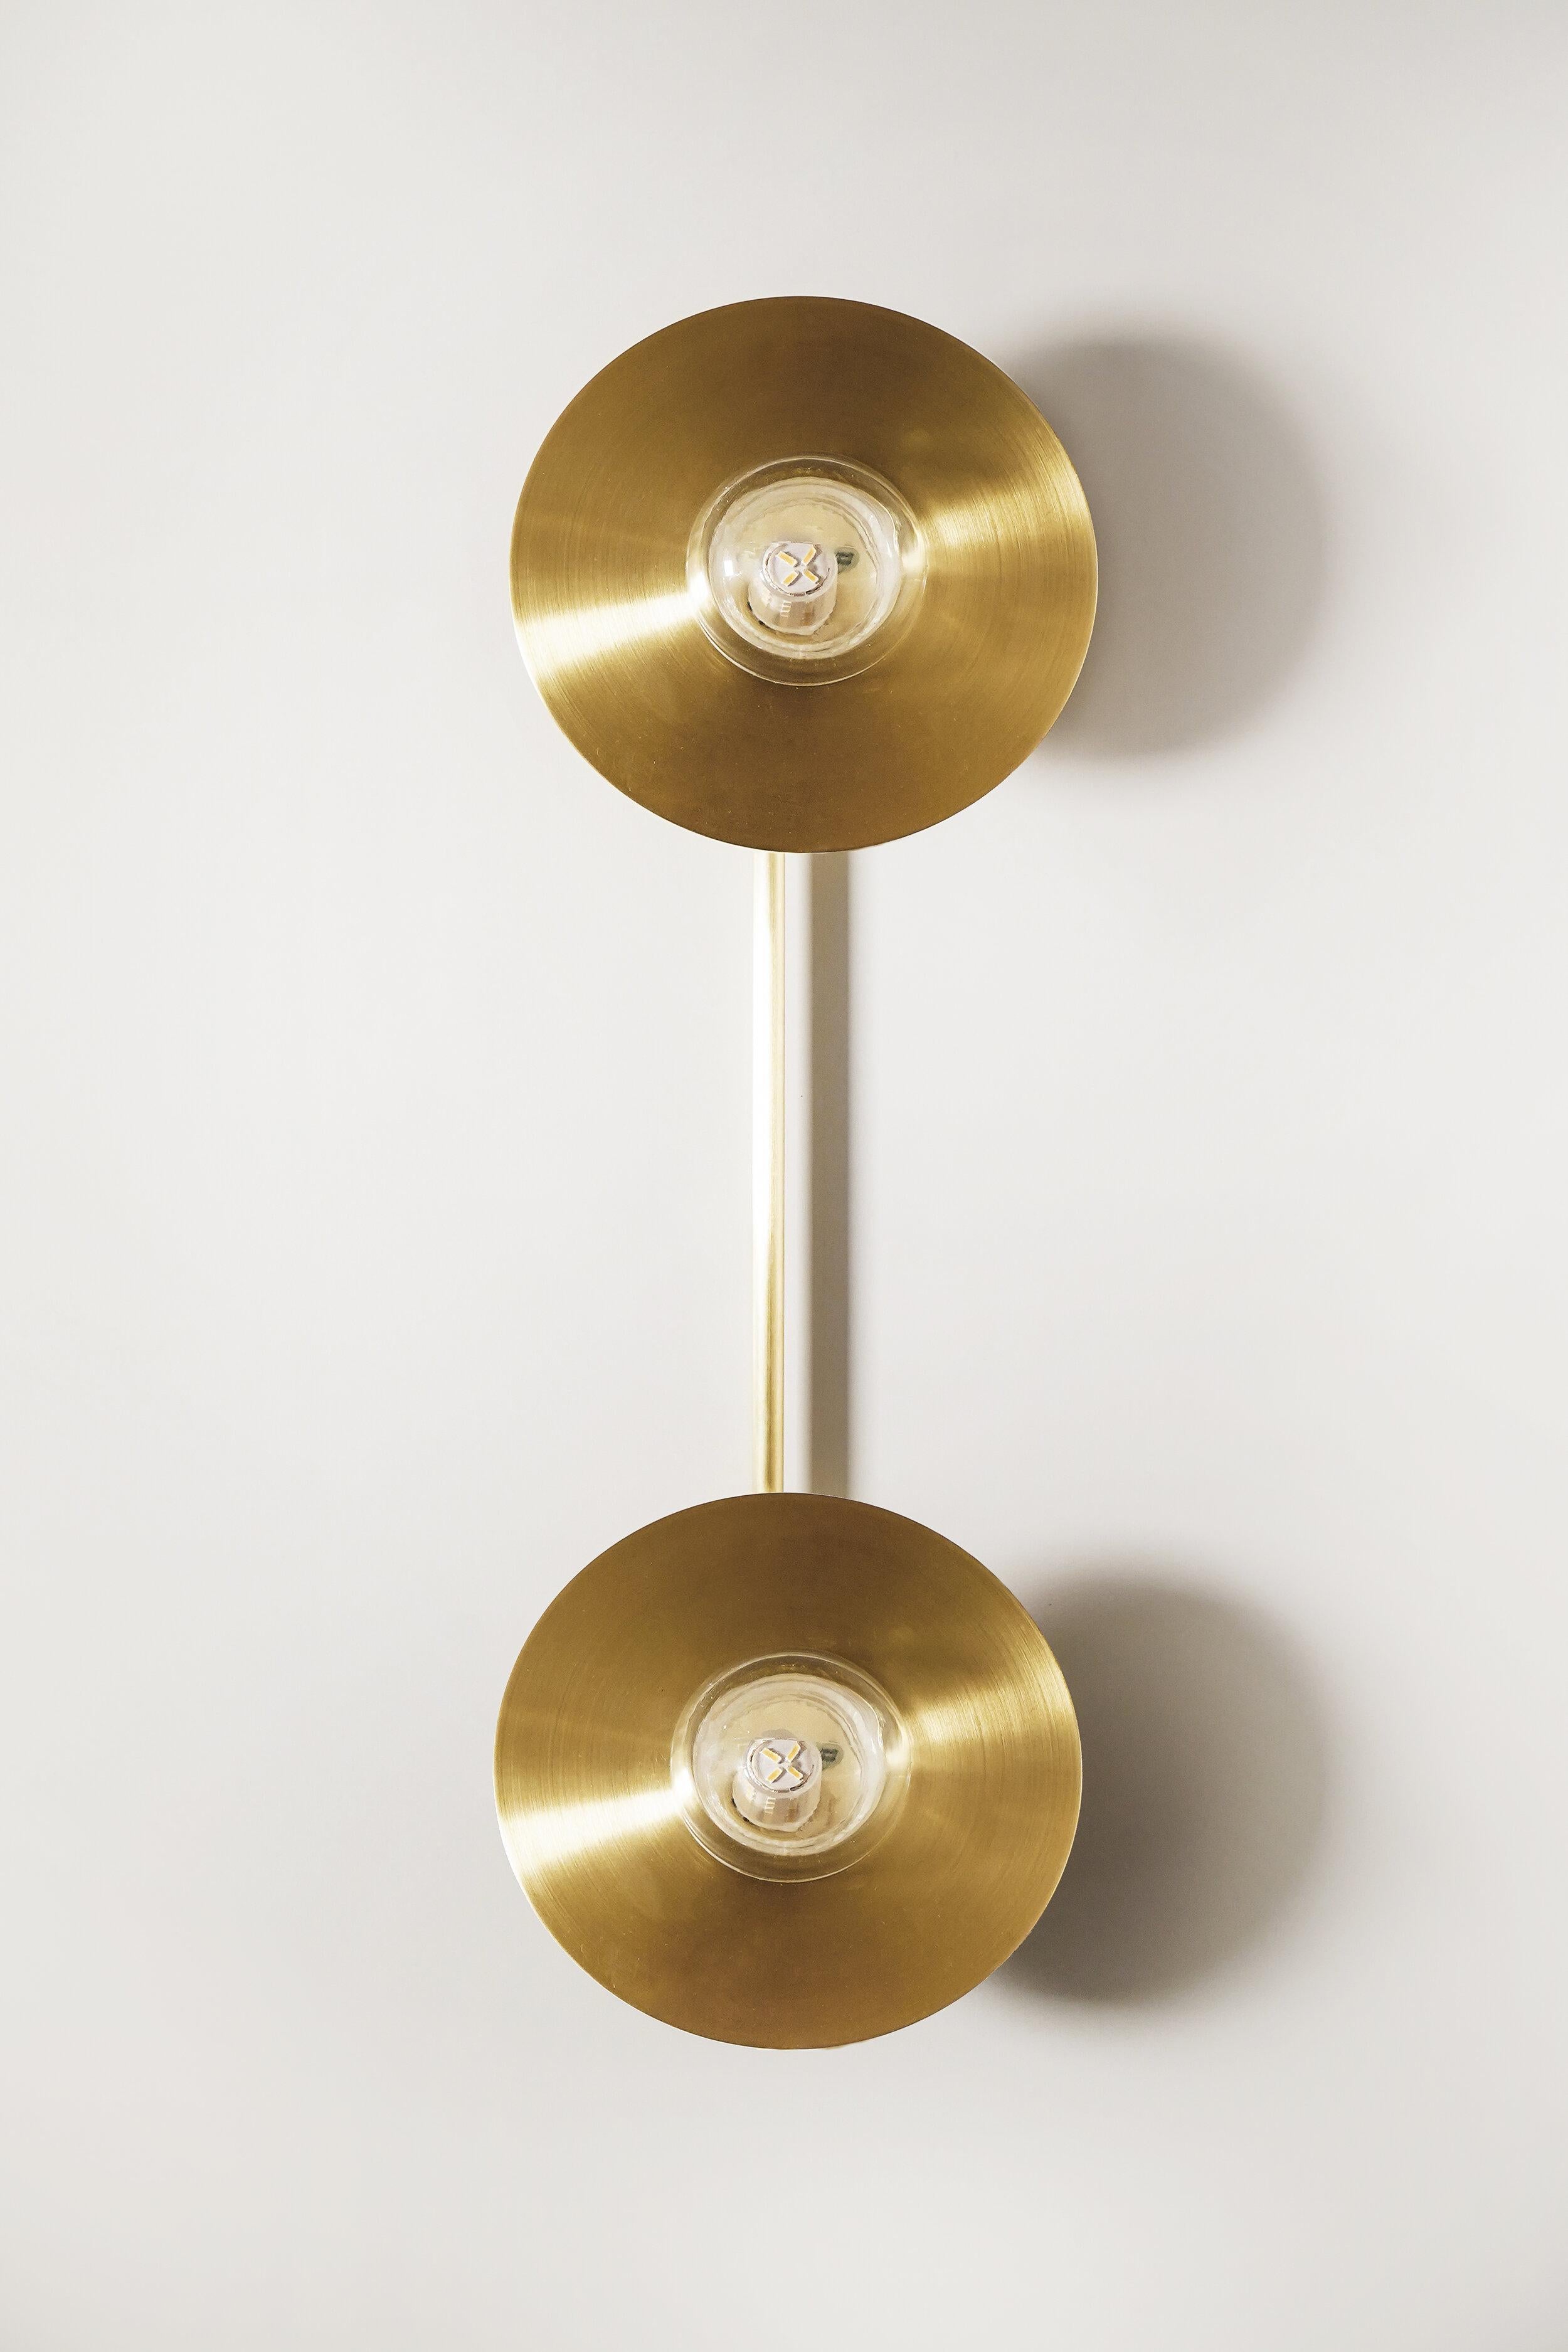 Alba double wall light by Contain
Dimensions: D 15 x W 60 x H 11.5 cm 
Materials: brass, 3D printed PLA structure and optical lens
Also available in different finishes and dimensions (15 cm Ø x 60 cm x 11,5 cm also available in 22 cm Ø x 60 cm x